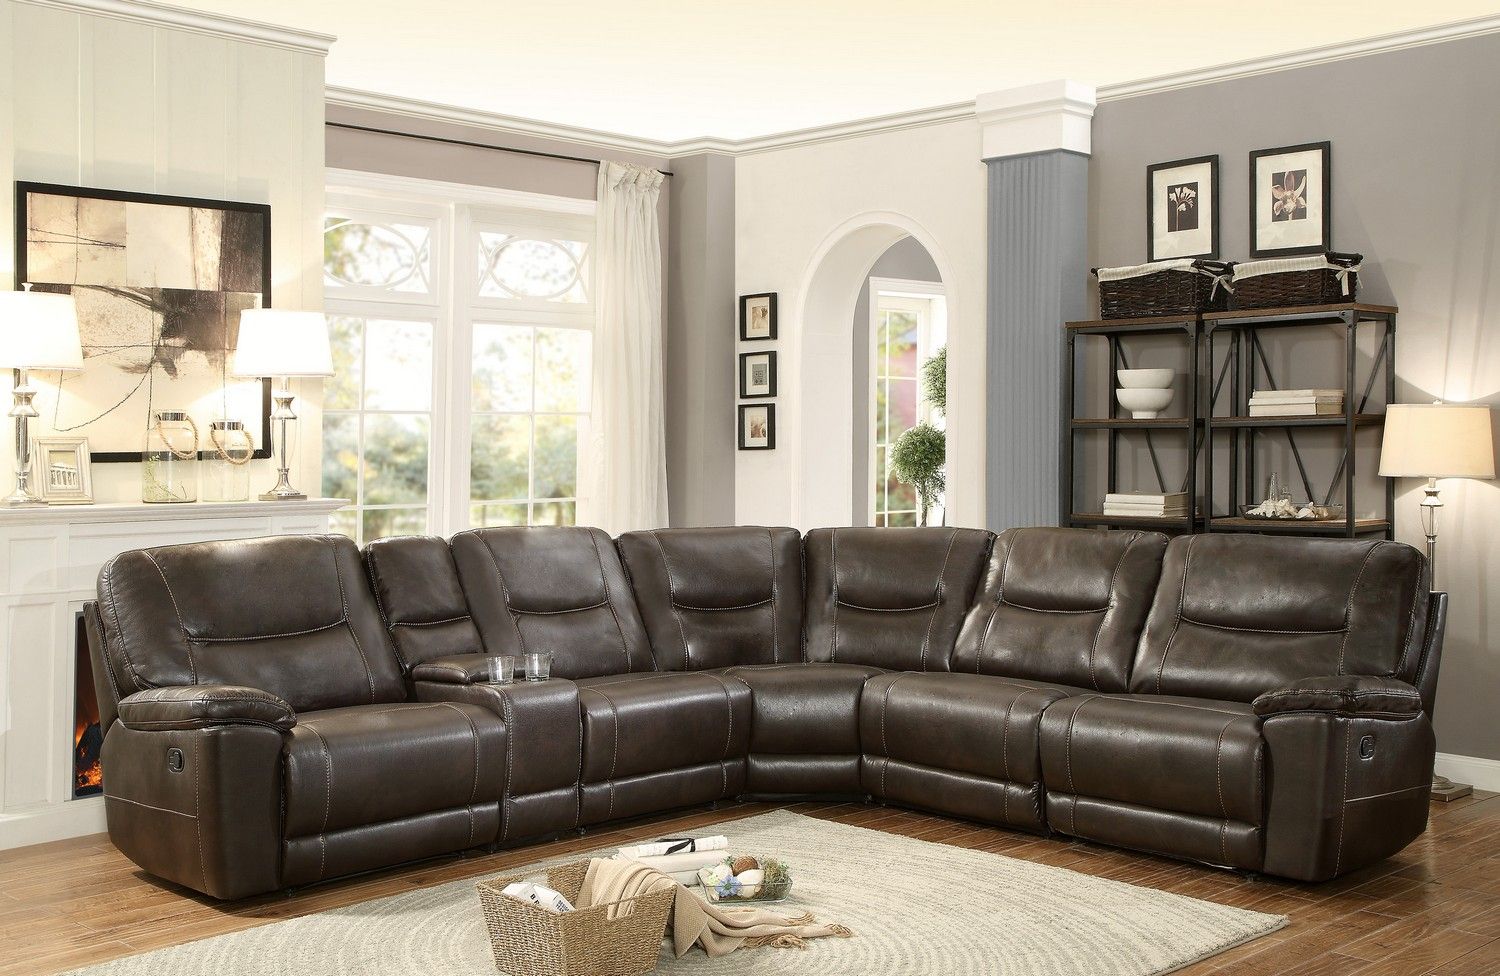 Homelegance Columbus Reclining Sectional Sofa Set D – Breathable Faux  Leather – Dark Brown 8490 Sectional Set D | Homelegance  Elegancefurnituredirect With Faux Leather Sectional Sofa Sets (View 13 of 15)